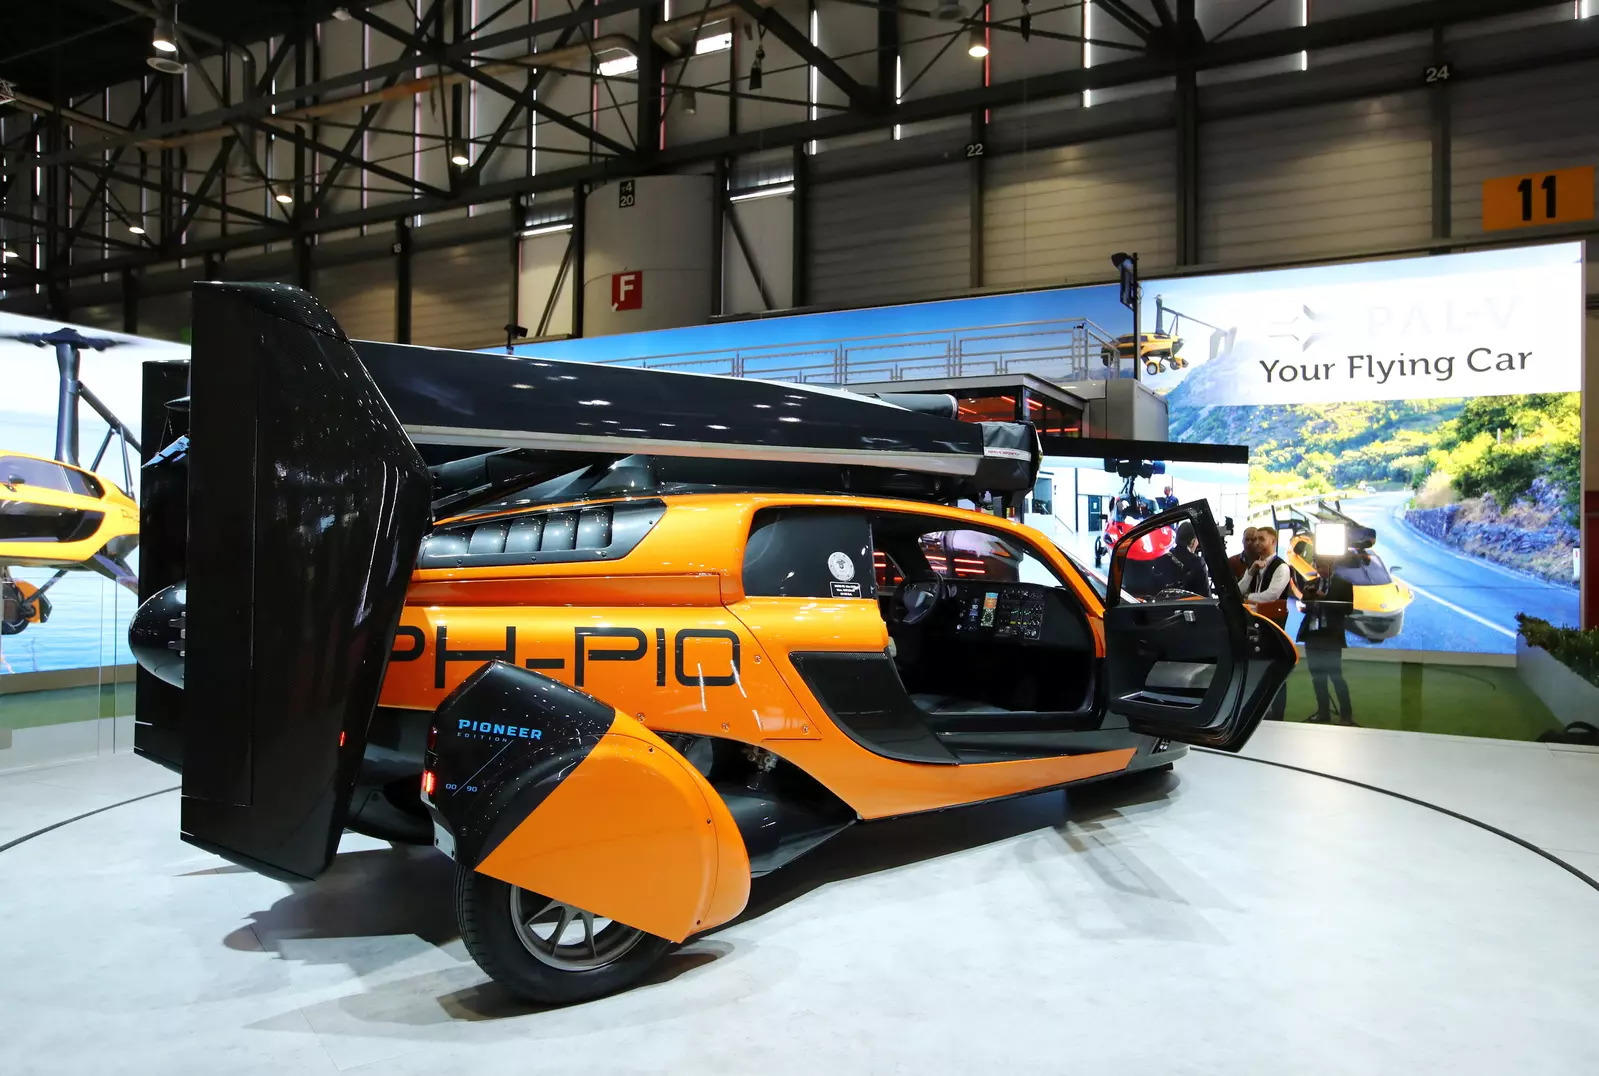 Jetpacks, flying cars and taxi drones: transport's future is in